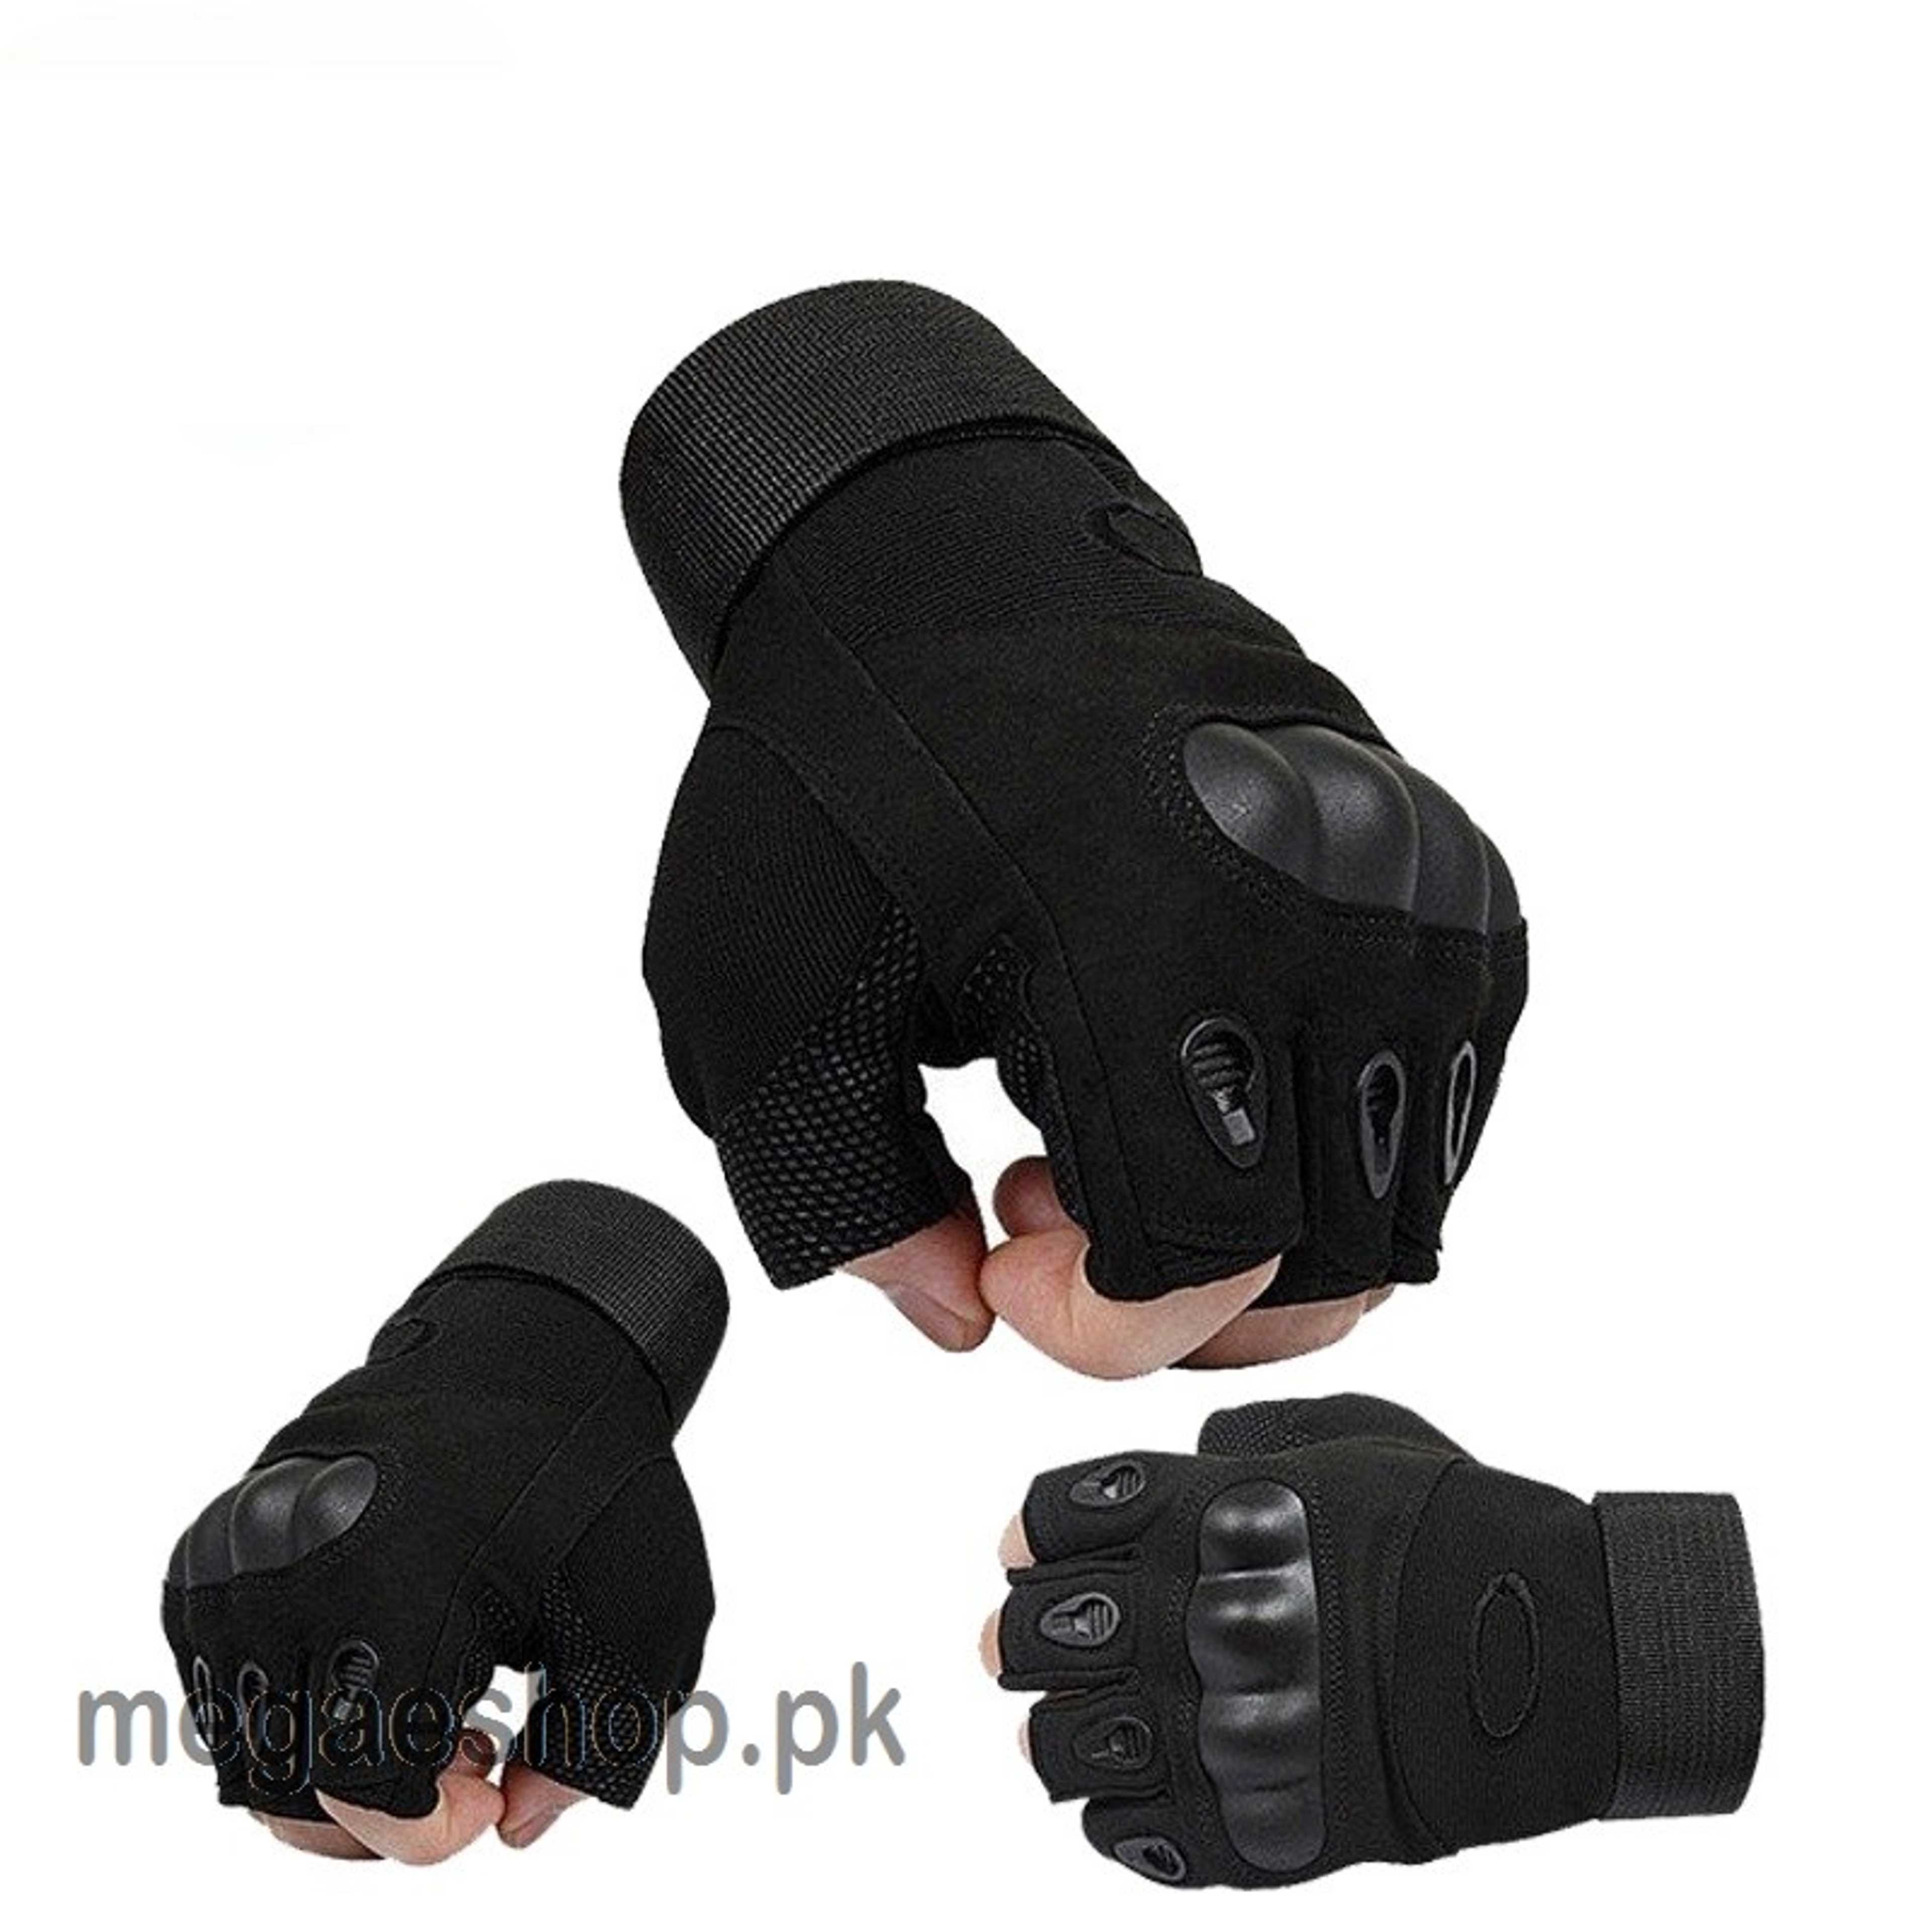 HIKING CYCLING GLOVES - HALF FINGER